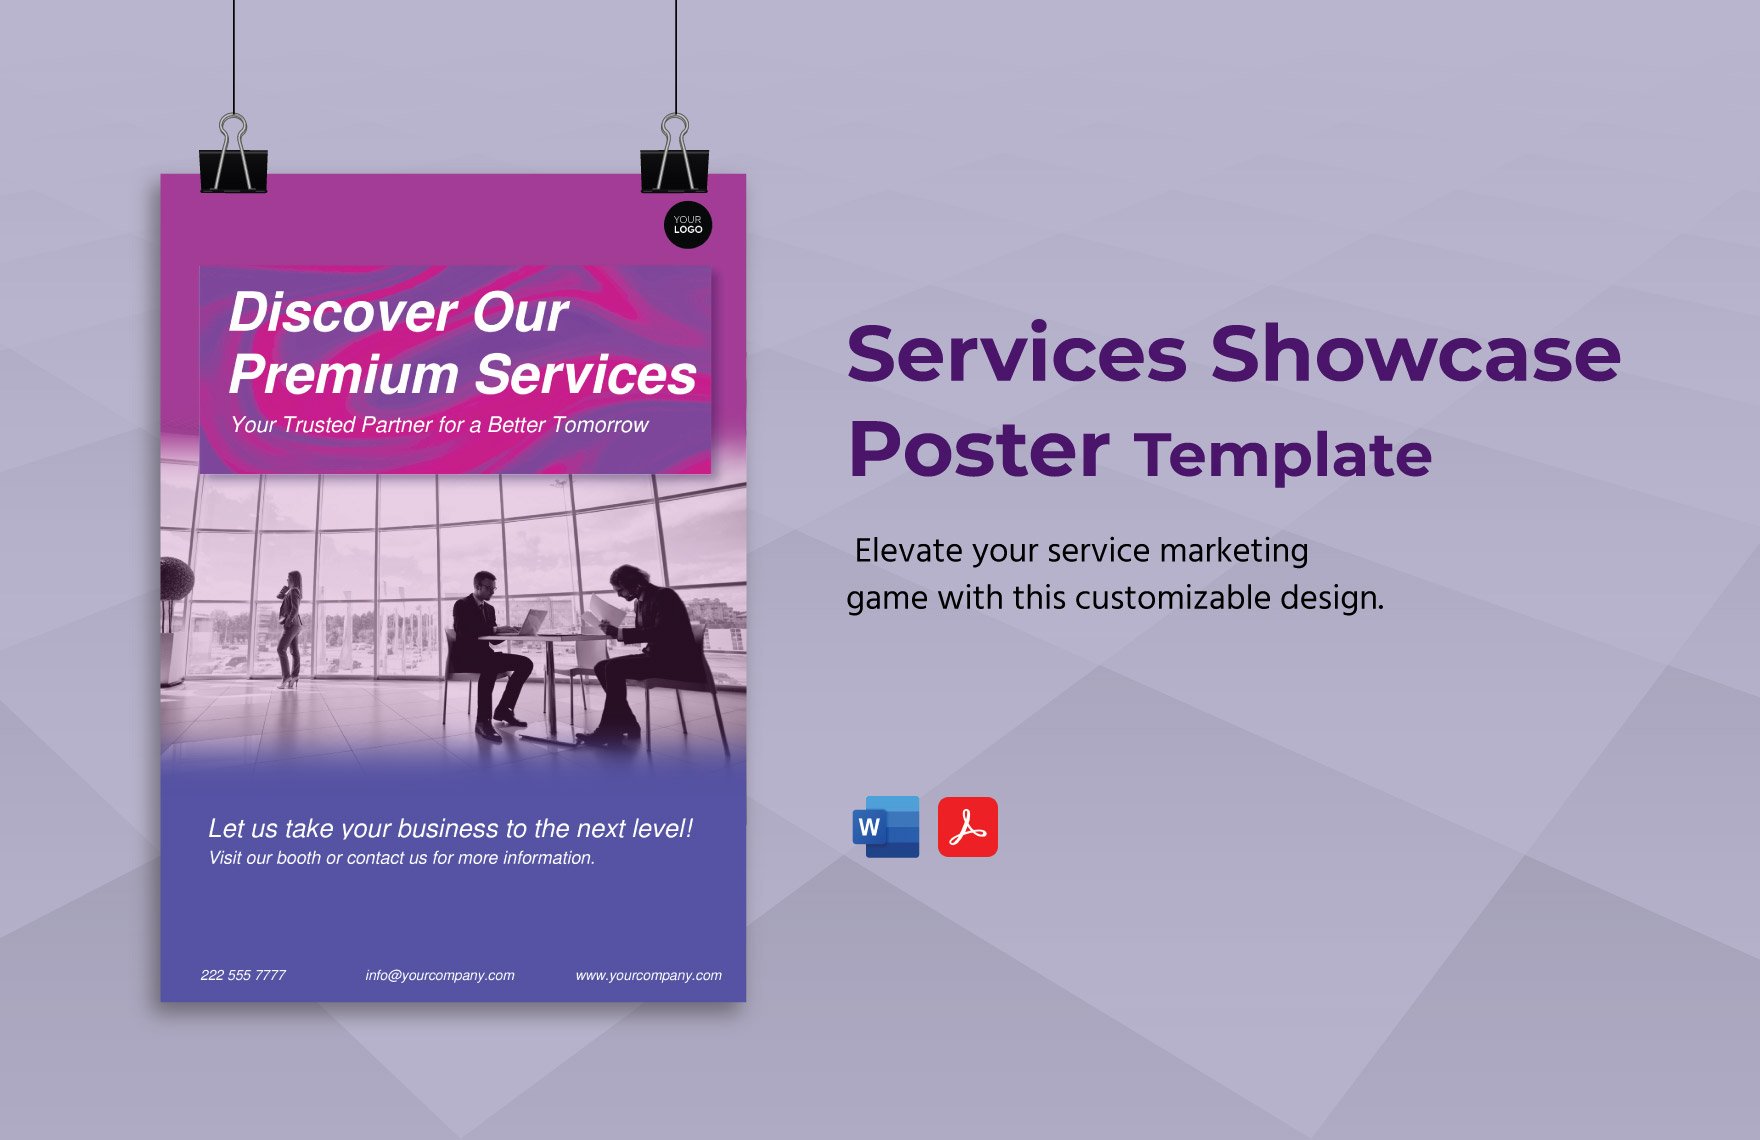 Services Showcase Poster Template